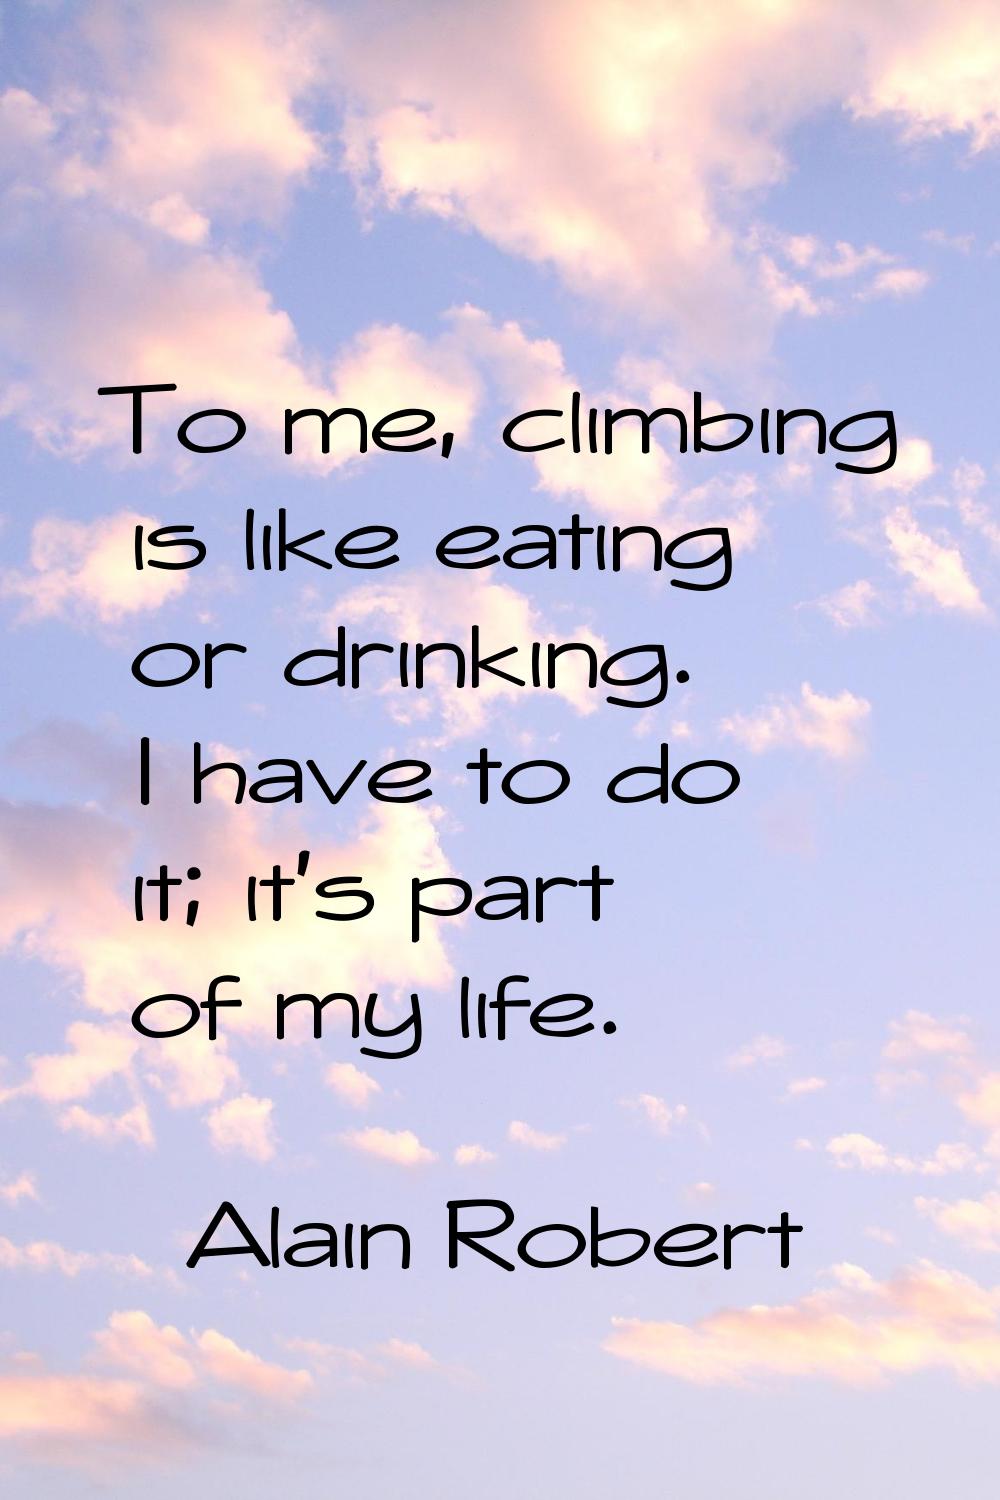 To me, climbing is like eating or drinking. I have to do it; it's part of my life.